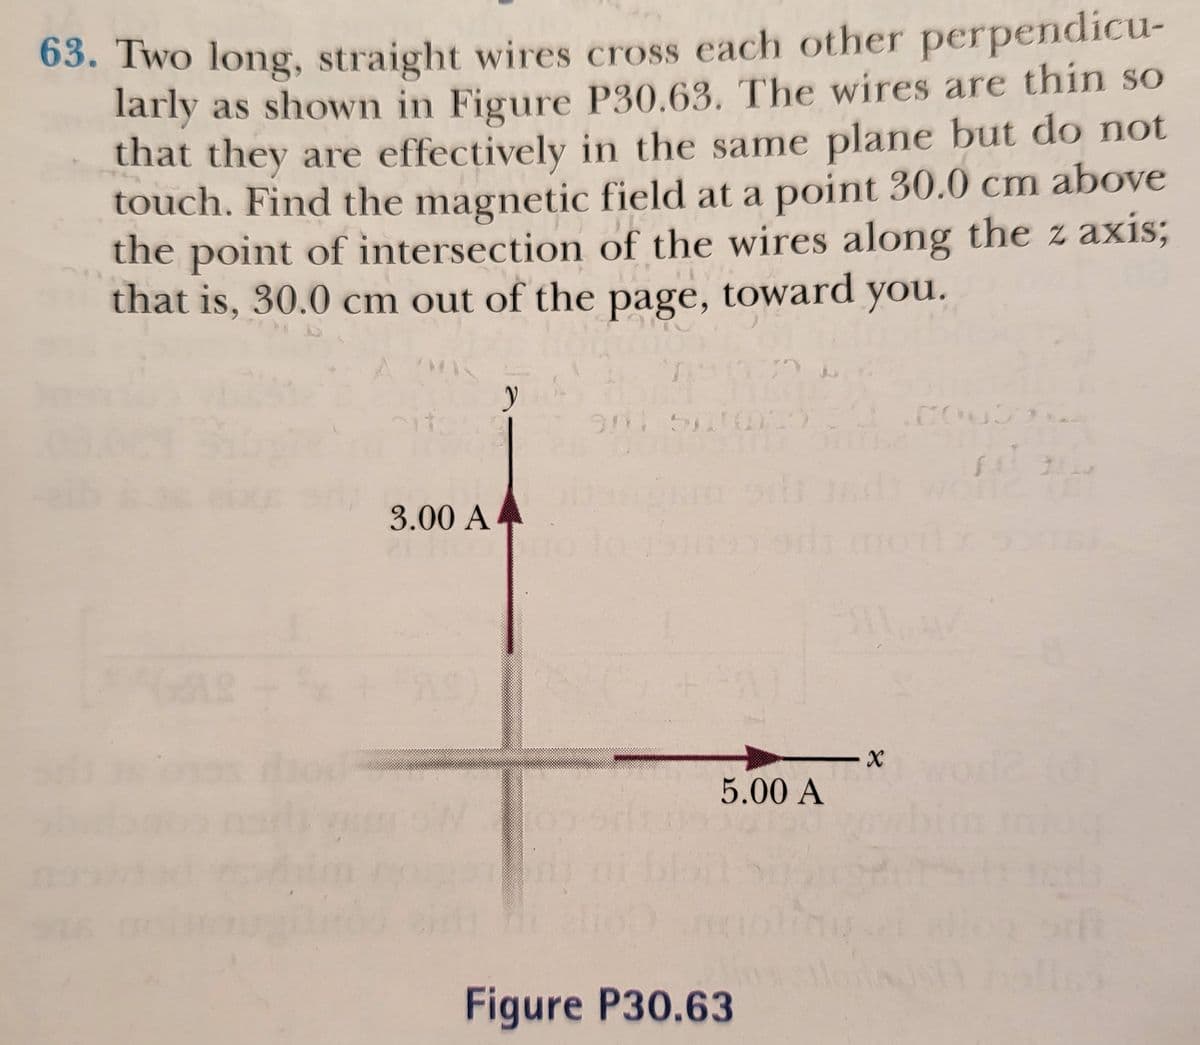 63. Two long, straight wires cross each other perpendicu-
larly as shown in Figure P30.63. The wires are thin so
that they are effectively in the same plane but do not
touch. Find the magnetic field at a point 30.0 cm above
the point of intersection of the wires along the z axis;
that is, 30.0 cm out of the page, toward you.
3.00 A4
5.00 A
Figure P30.63
